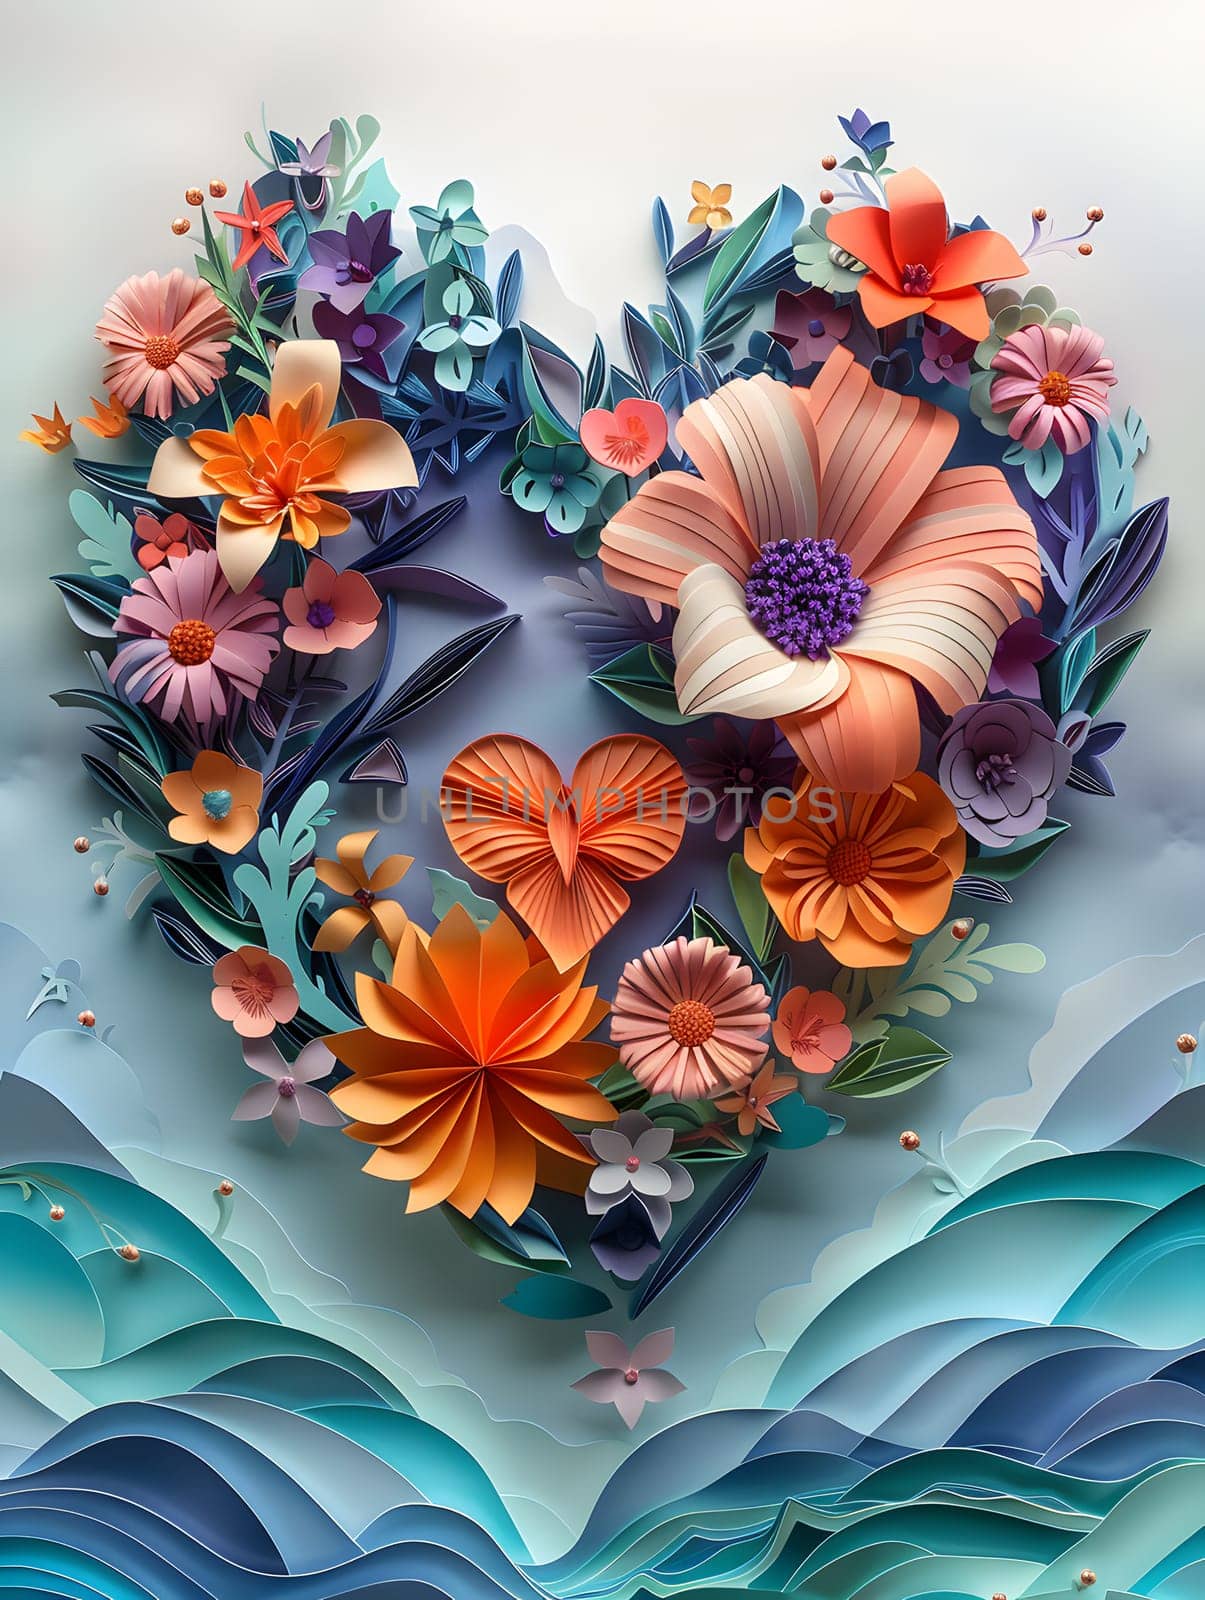 A heart crafted from paper flowers sits against a backdrop of majestic mountains, showcasing a creative blend of art and nature